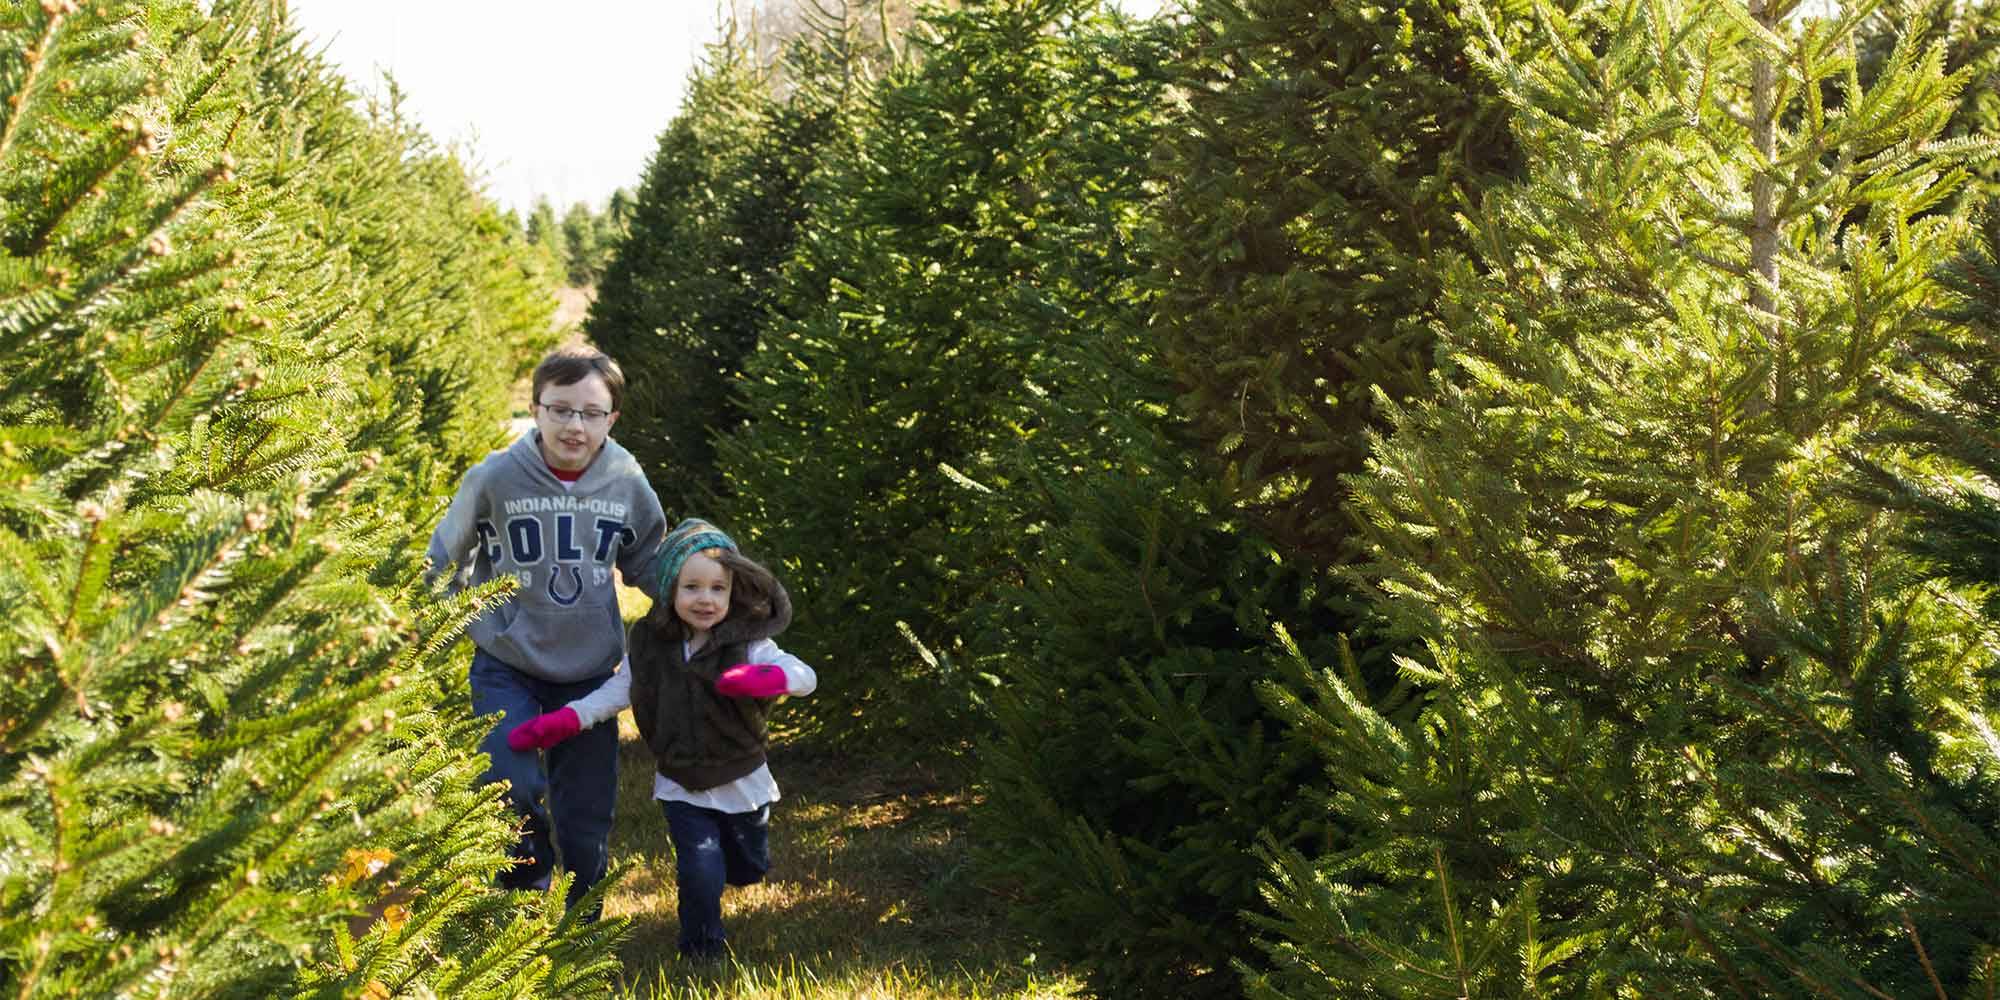 Choose & Cut Christmas Trees at Piney Acres in Fortville, IN